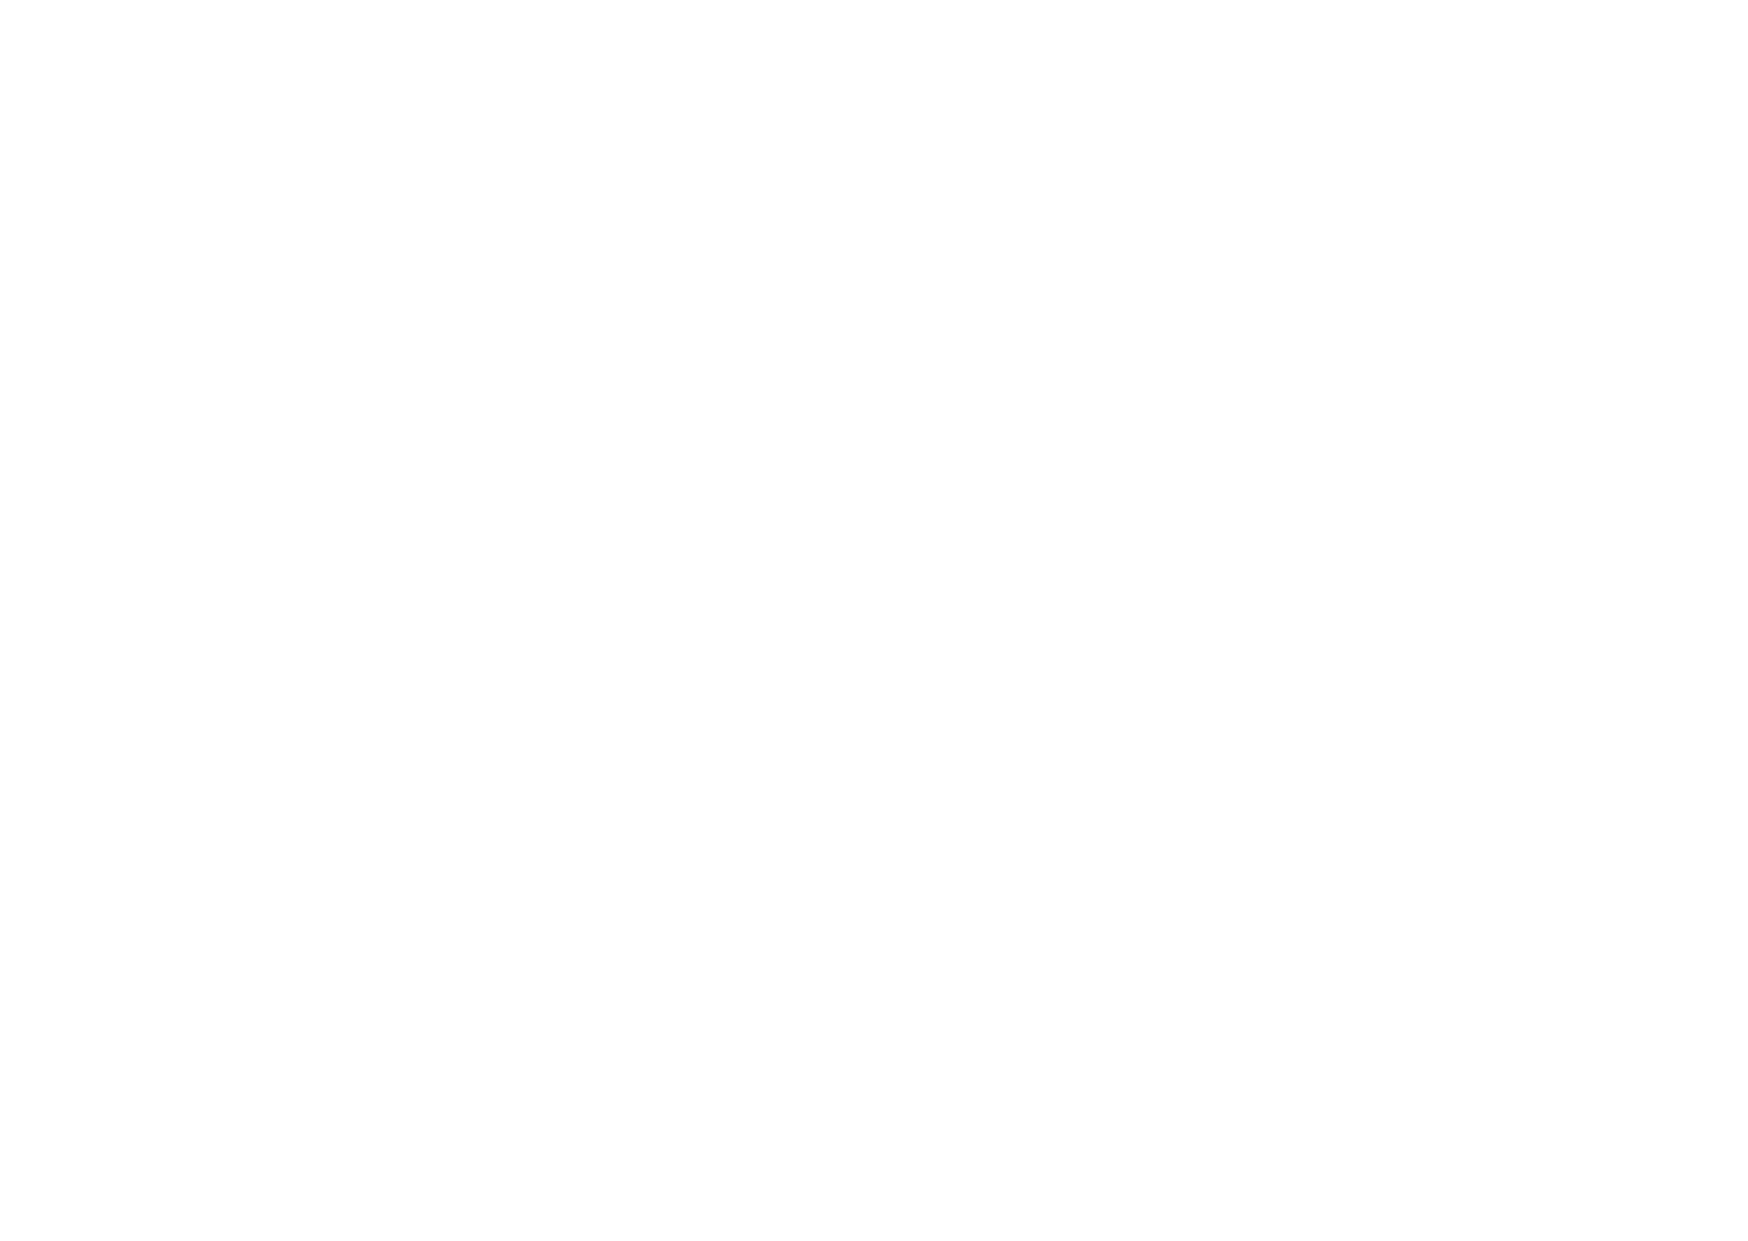 Chester One City Plan